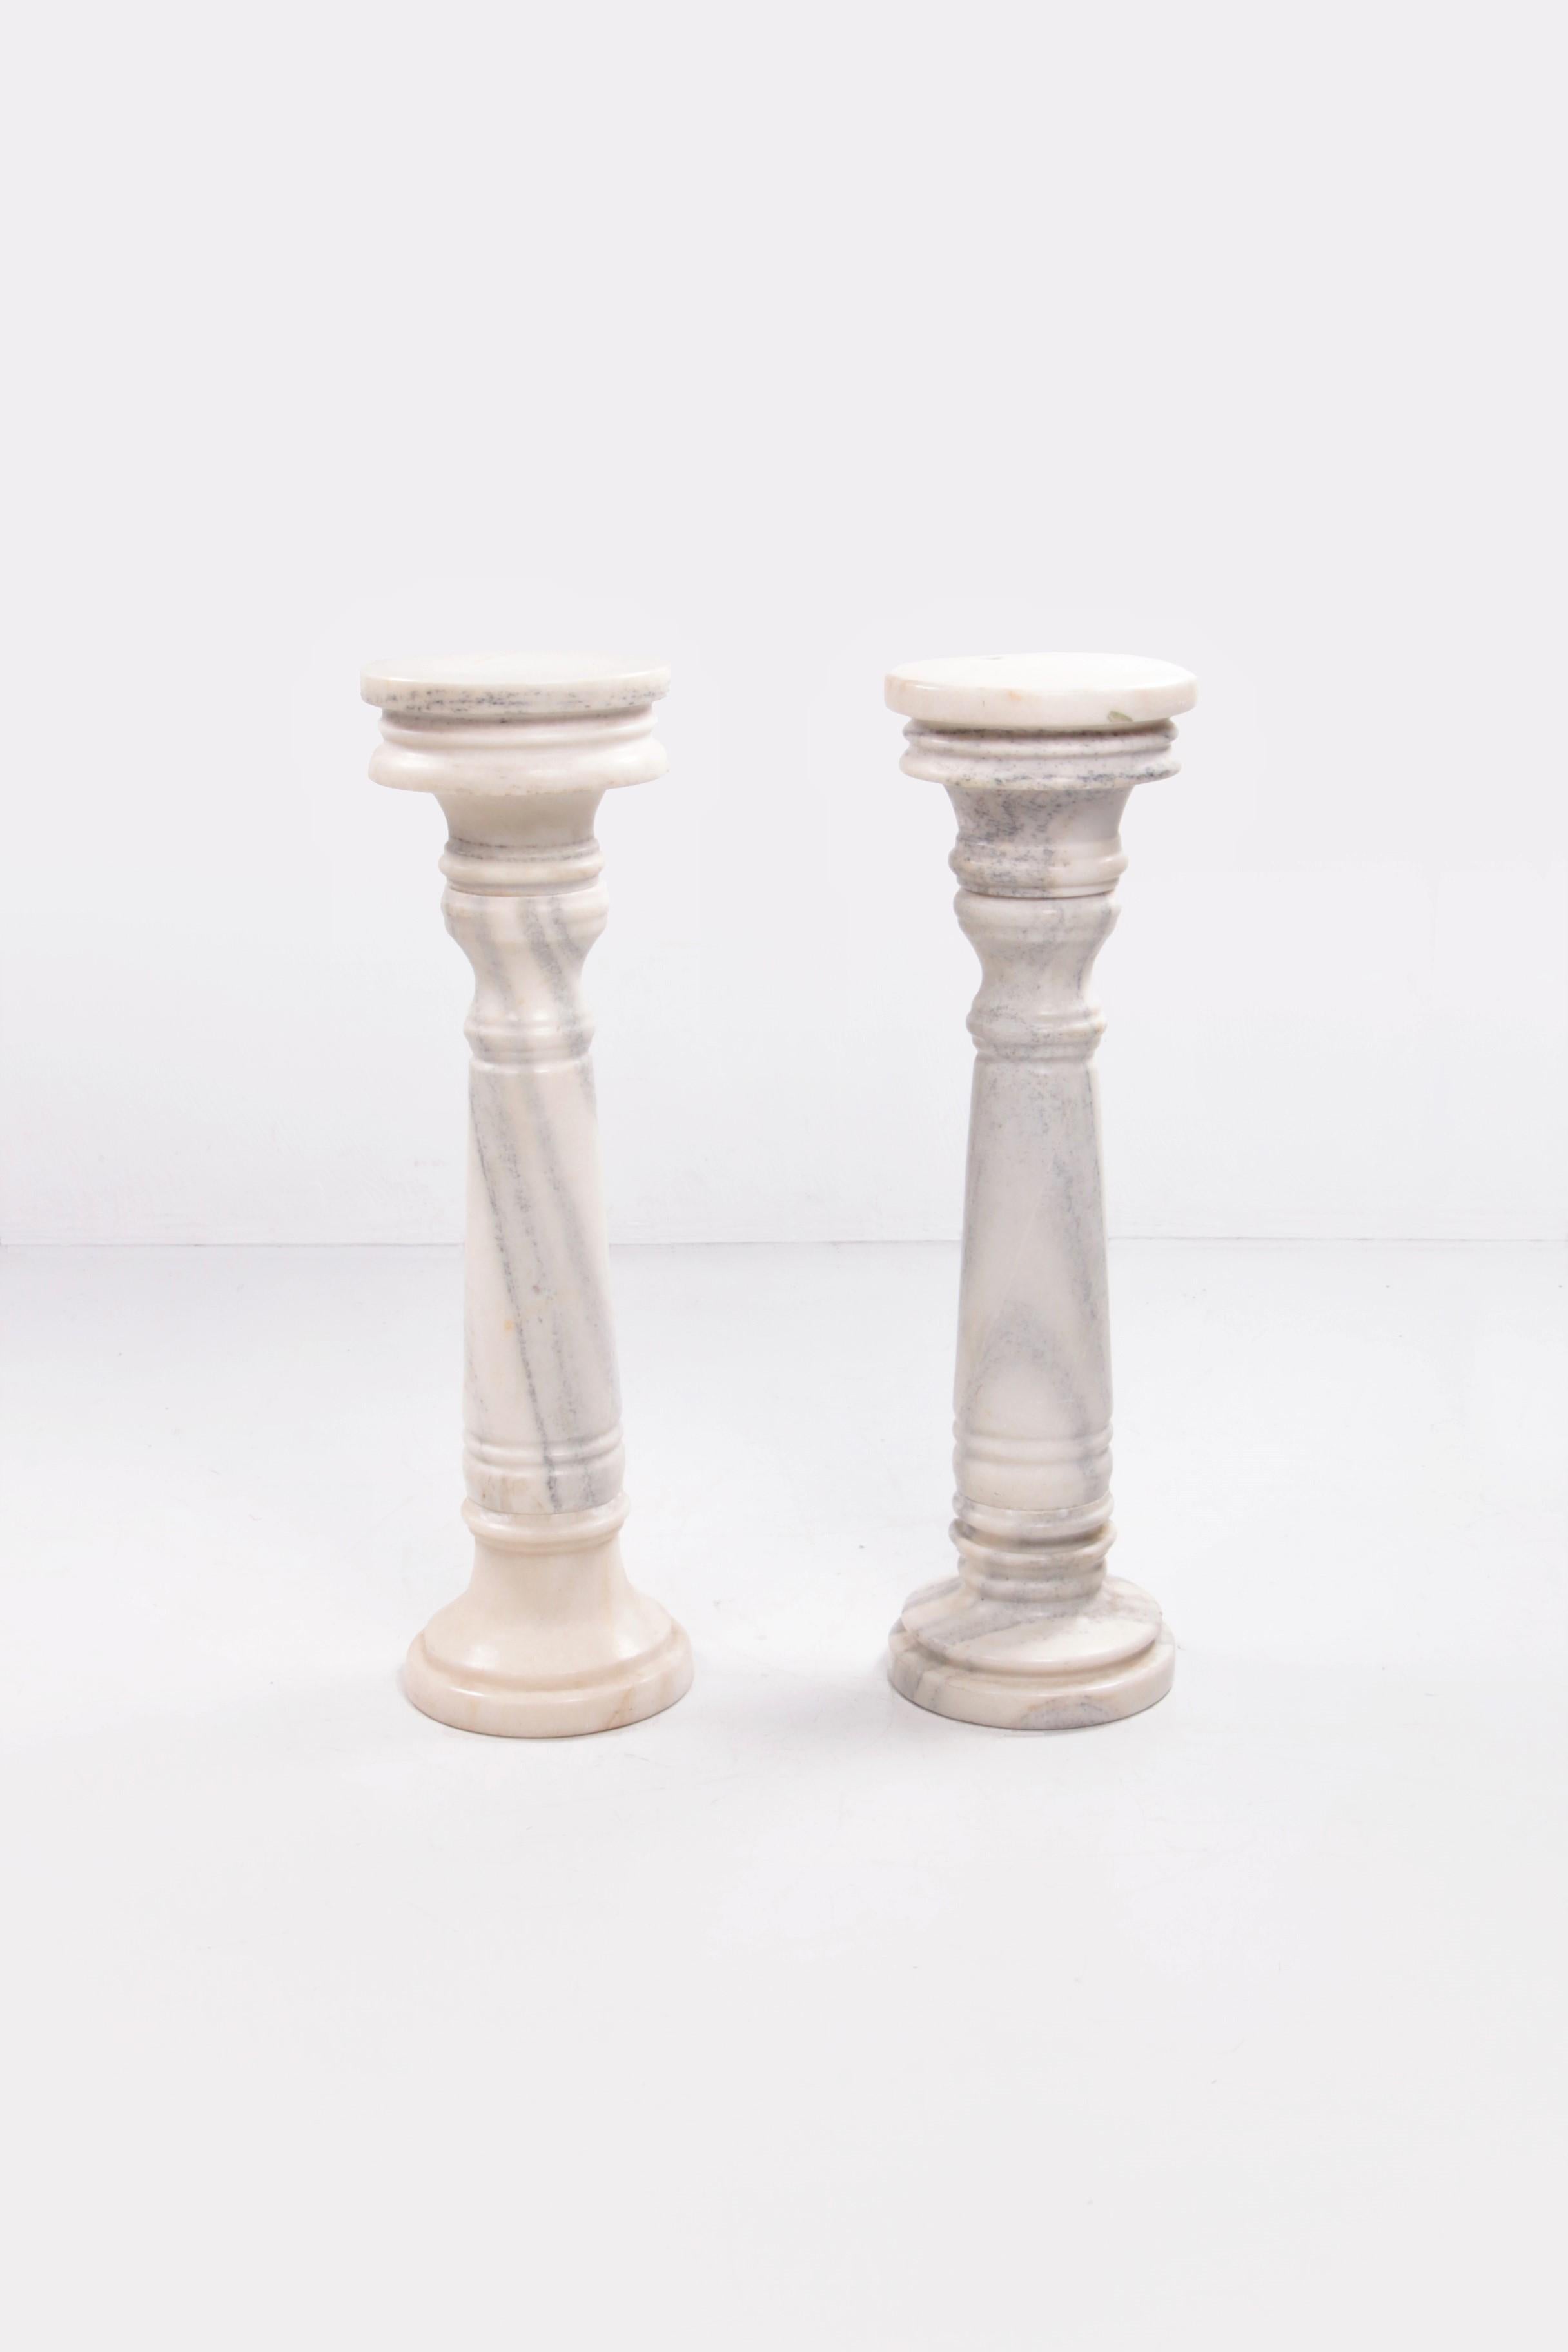 Set of 2 beautiful white gray veined marble pedestals France 1920.

This is a set of 2 white veined marble pedestals in the shape of a column with a fluted shaft. The ringed capital is covered with a round top on which a sculpture or clock can be